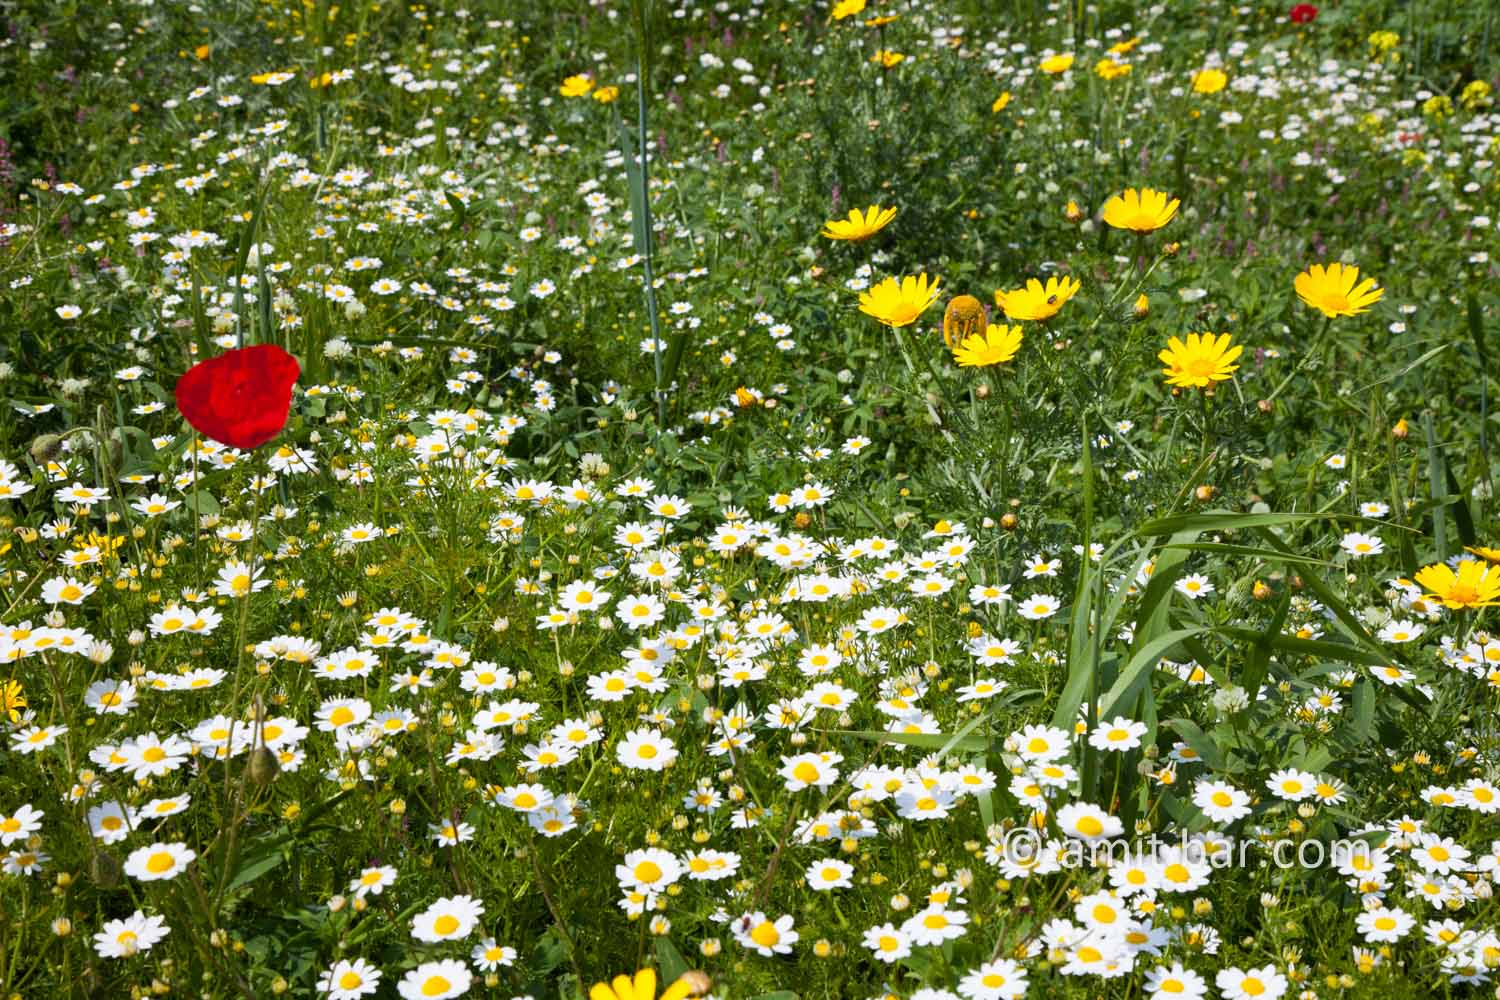 Wild flowers in Israel I: Wild flowers at spring time in Israel